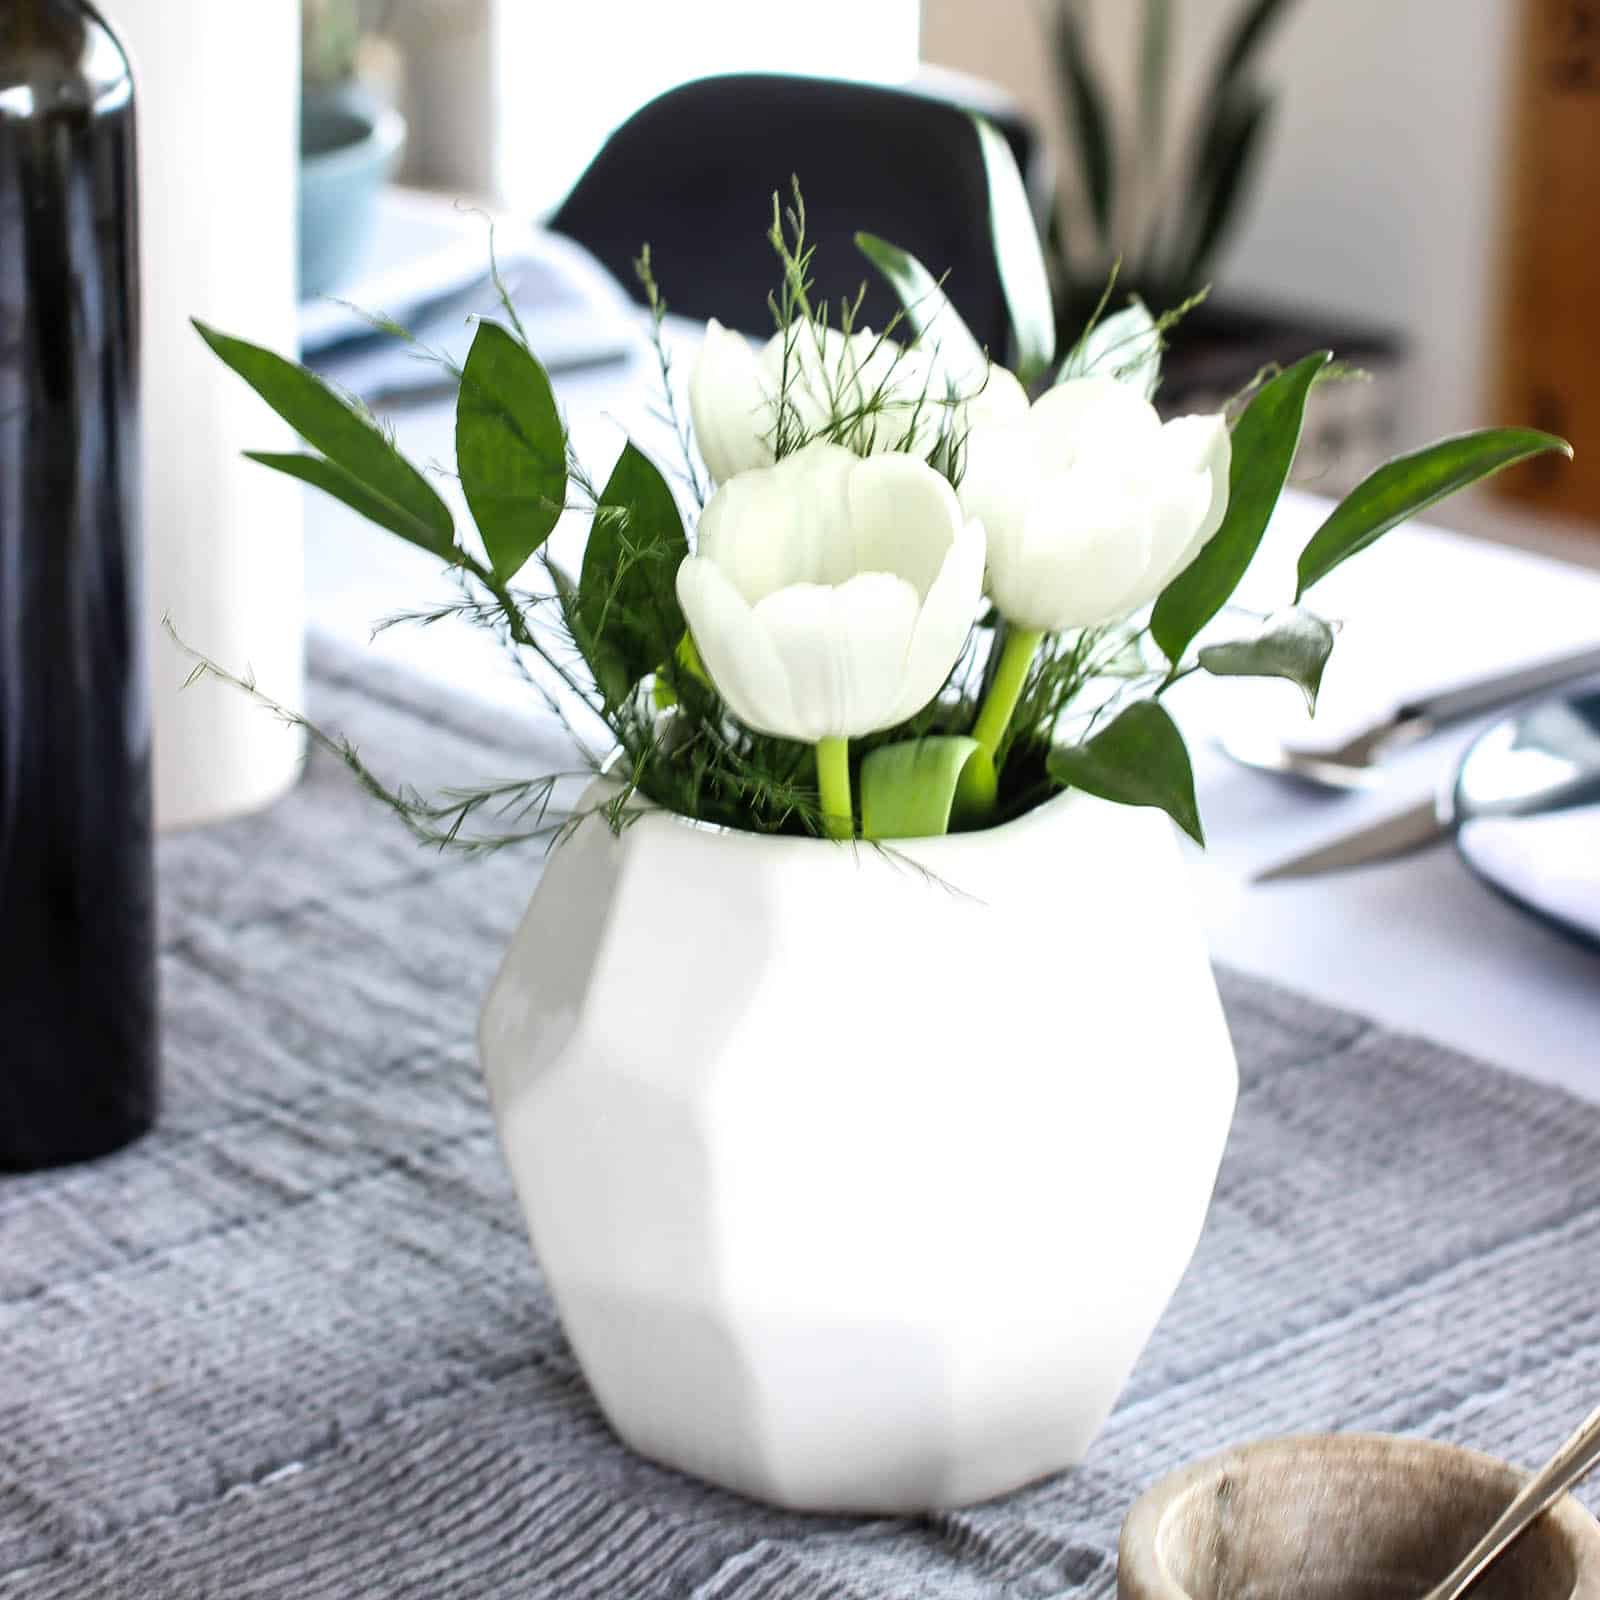 Beautiful modern spring flower arrangements! An easy tutorial for beginners! Learn to arrange beautiful spring centrepieces for Easter, Mother's Day, Weddings, Bridal Showers, or any party! Love the stunning white and green arrangements in this video tutorial!